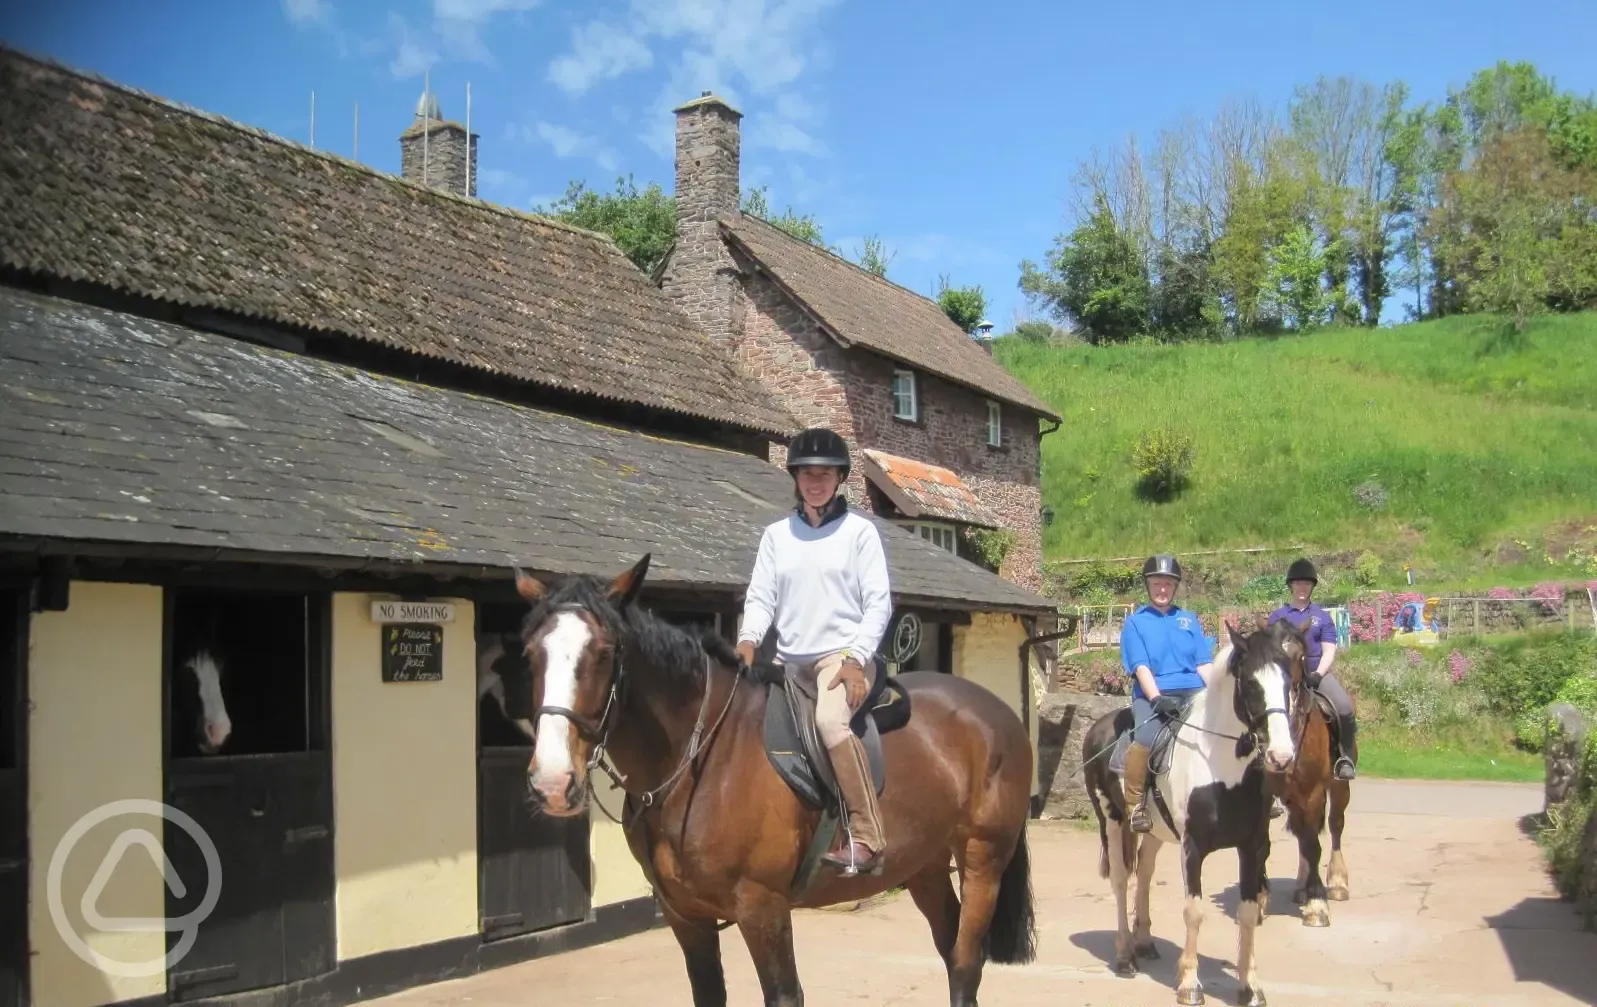 Riding stables at Burrowhayes Farm Caravan and Camping Site